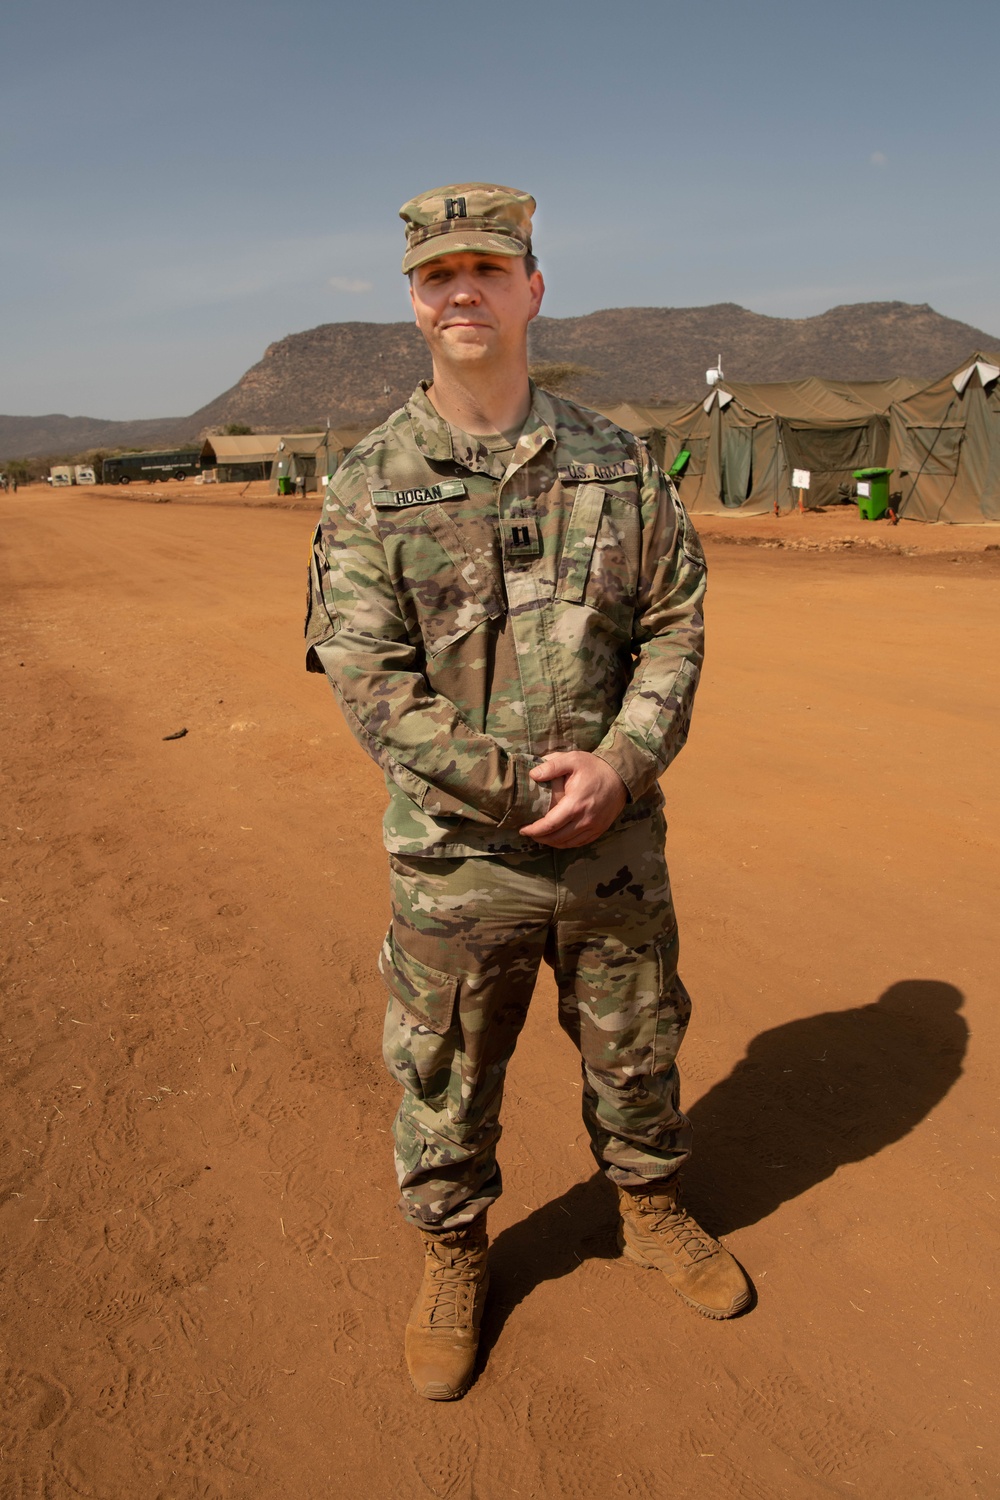 Massachusetts National Guard medical planner experiences Kenya for first time